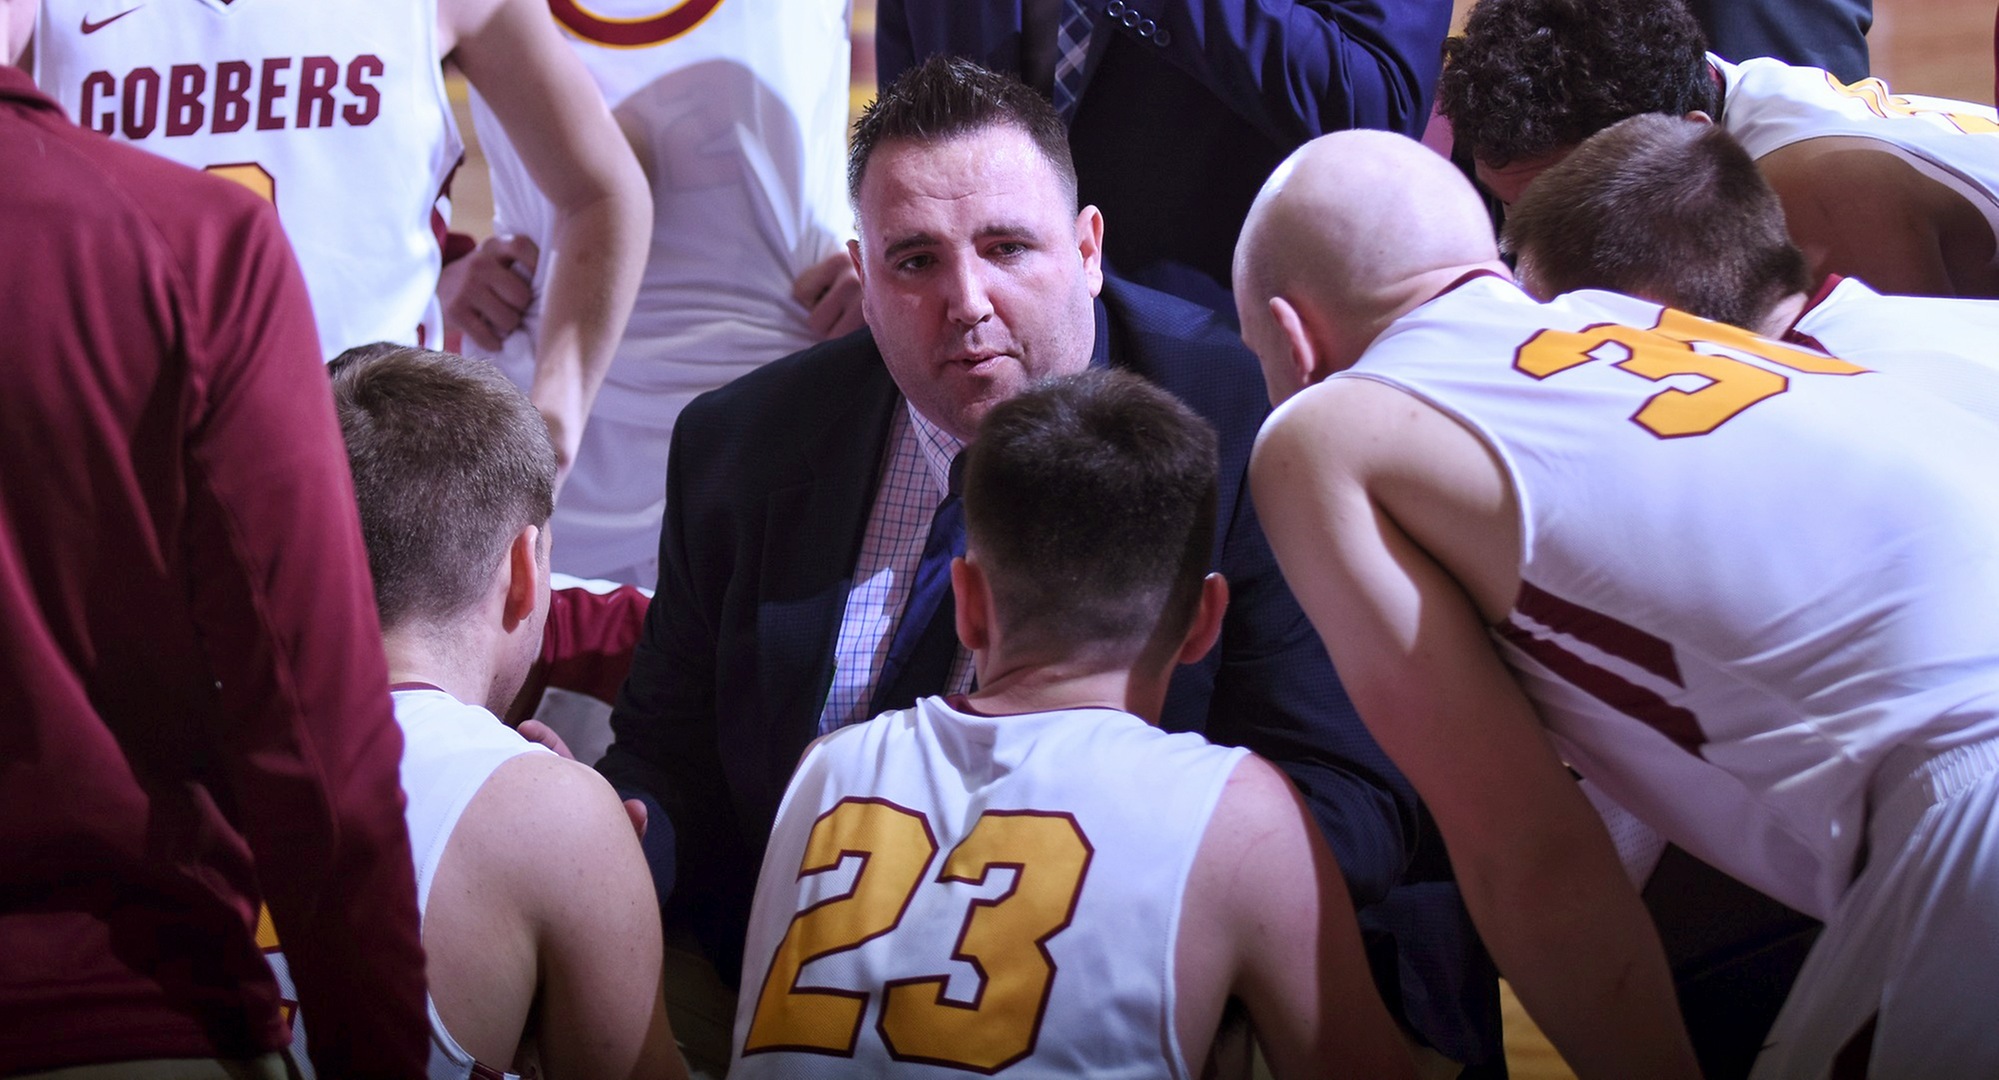 Concordia men's basketball head coach Grant Hemmingsen resigned after his third season with the Cobbers.